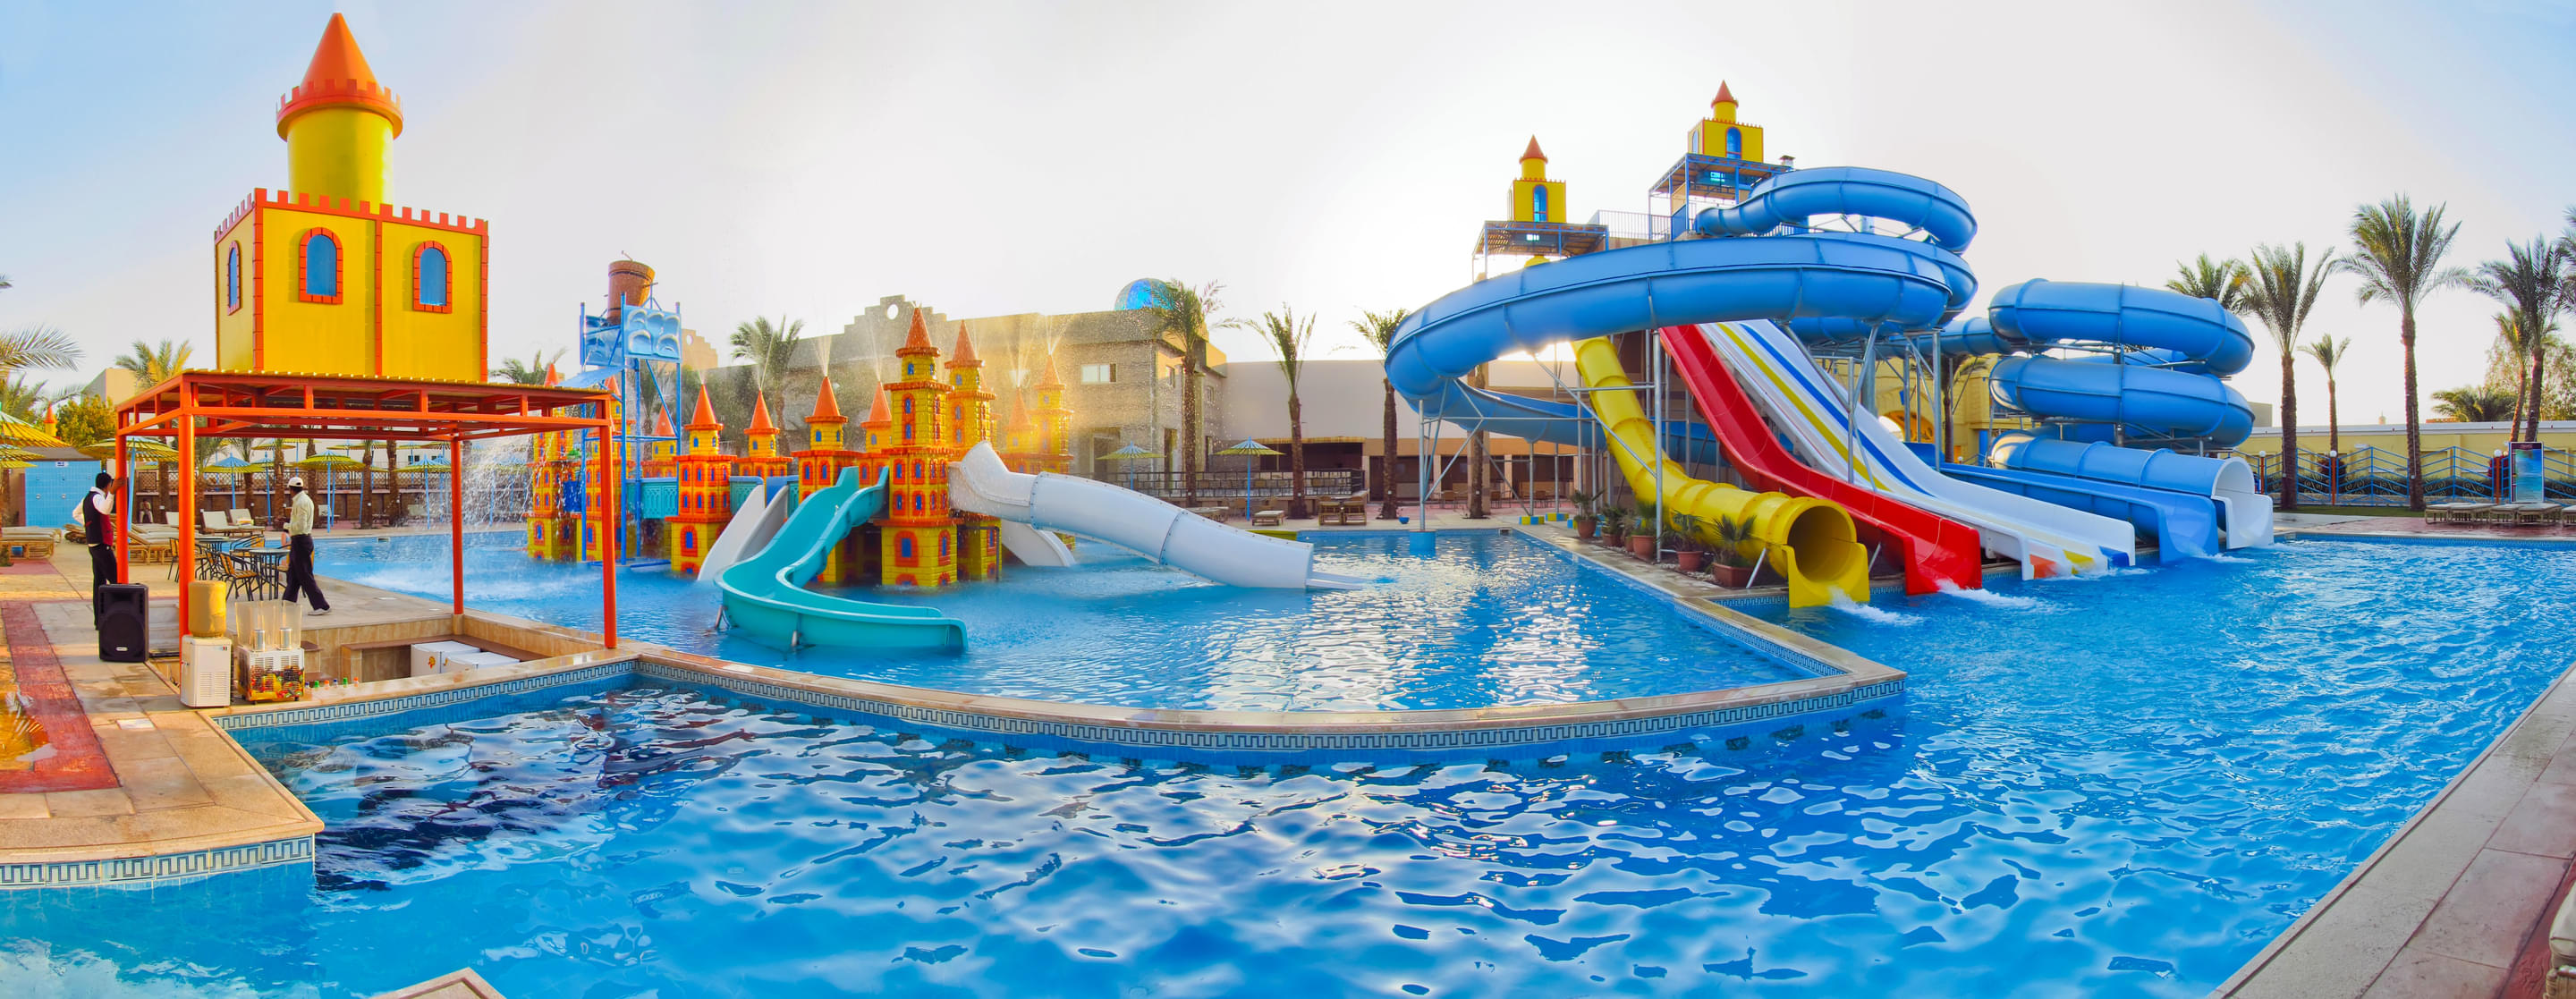 Best Water Parks in Maharashtra